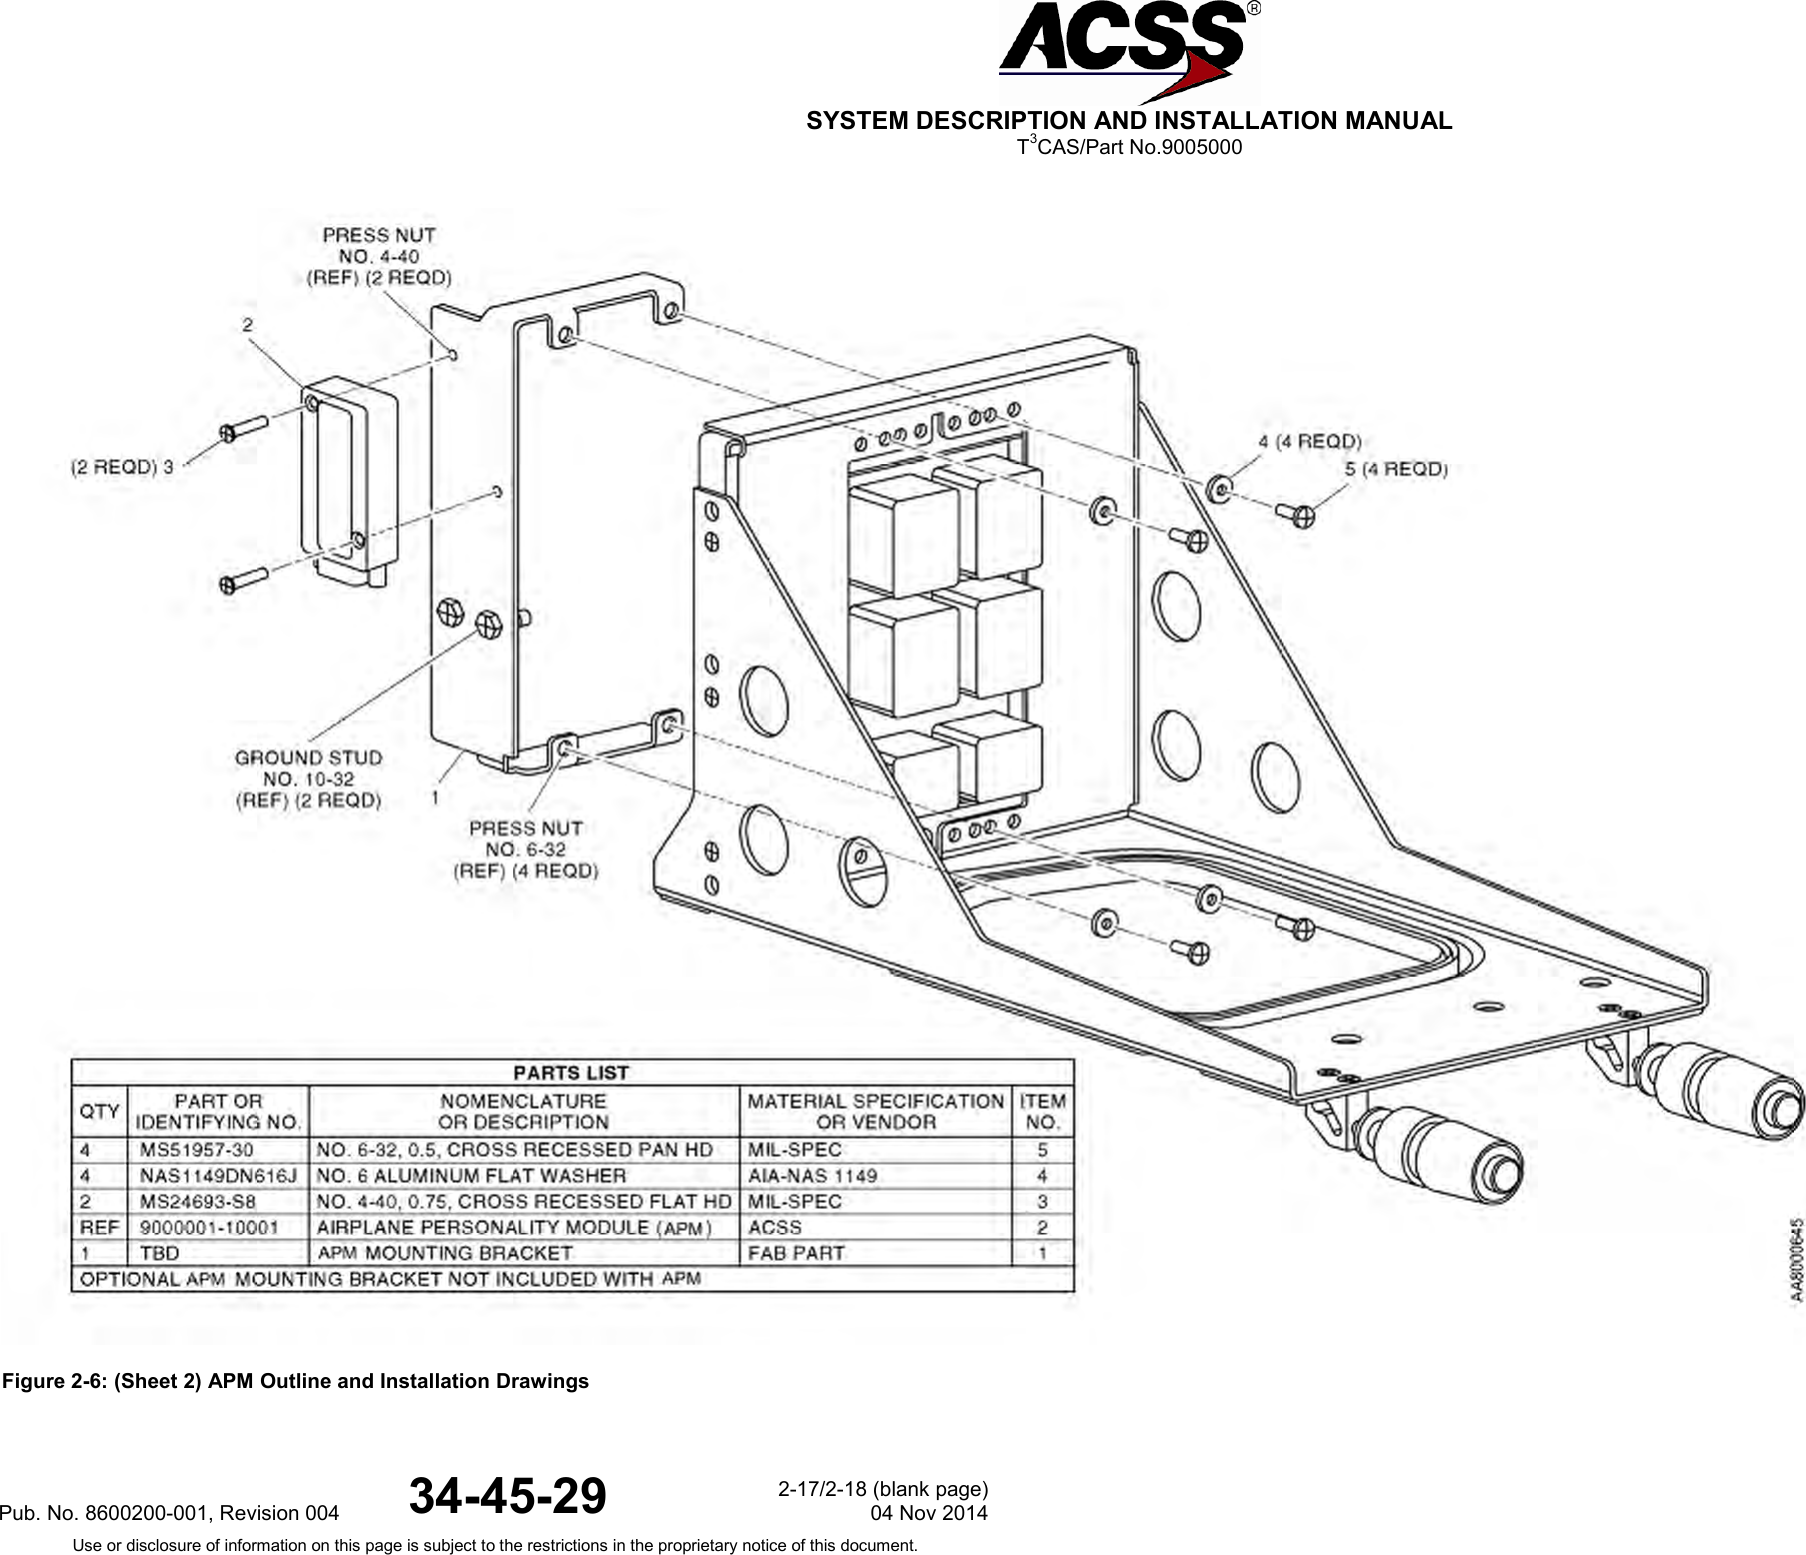  SYSTEM DESCRIPTION AND INSTALLATION MANUAL T3CAS/Part No.9005000  Figure 2-6: (Sheet 2) APM Outline and Installation DrawingsPub. No. 8600200-001, Revision 004 34-45-29 2-17/2-18 (blank page) 04 Nov 2014 Use or disclosure of information on this page is subject to the restrictions in the proprietary notice of this document.  